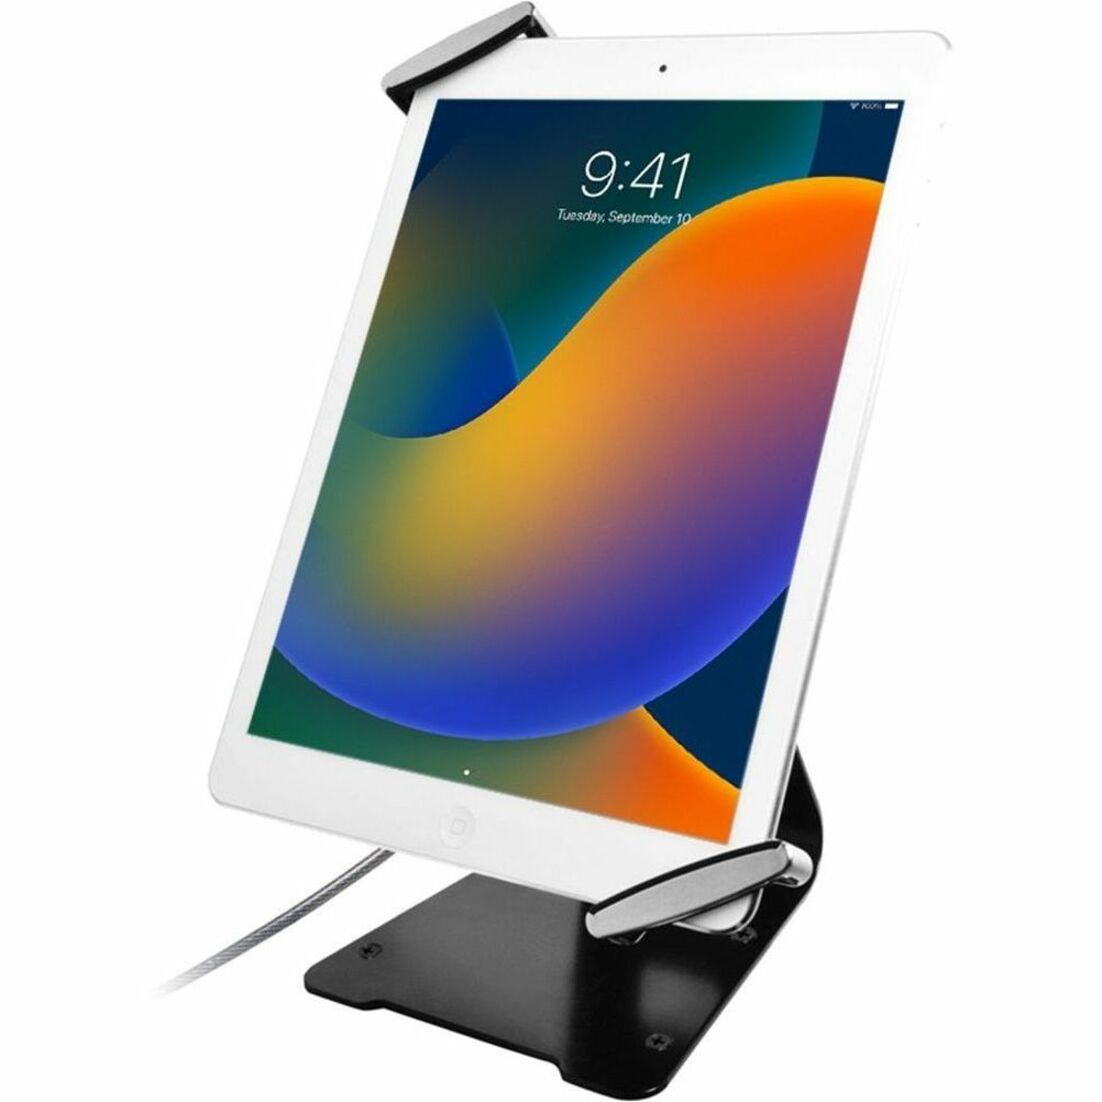 CTA Digital PAD-UATGS Universal Anti-Theft Security Grip Holder with Stand for Tablets, Rotating Stand, Adjustable Angle, Lockable